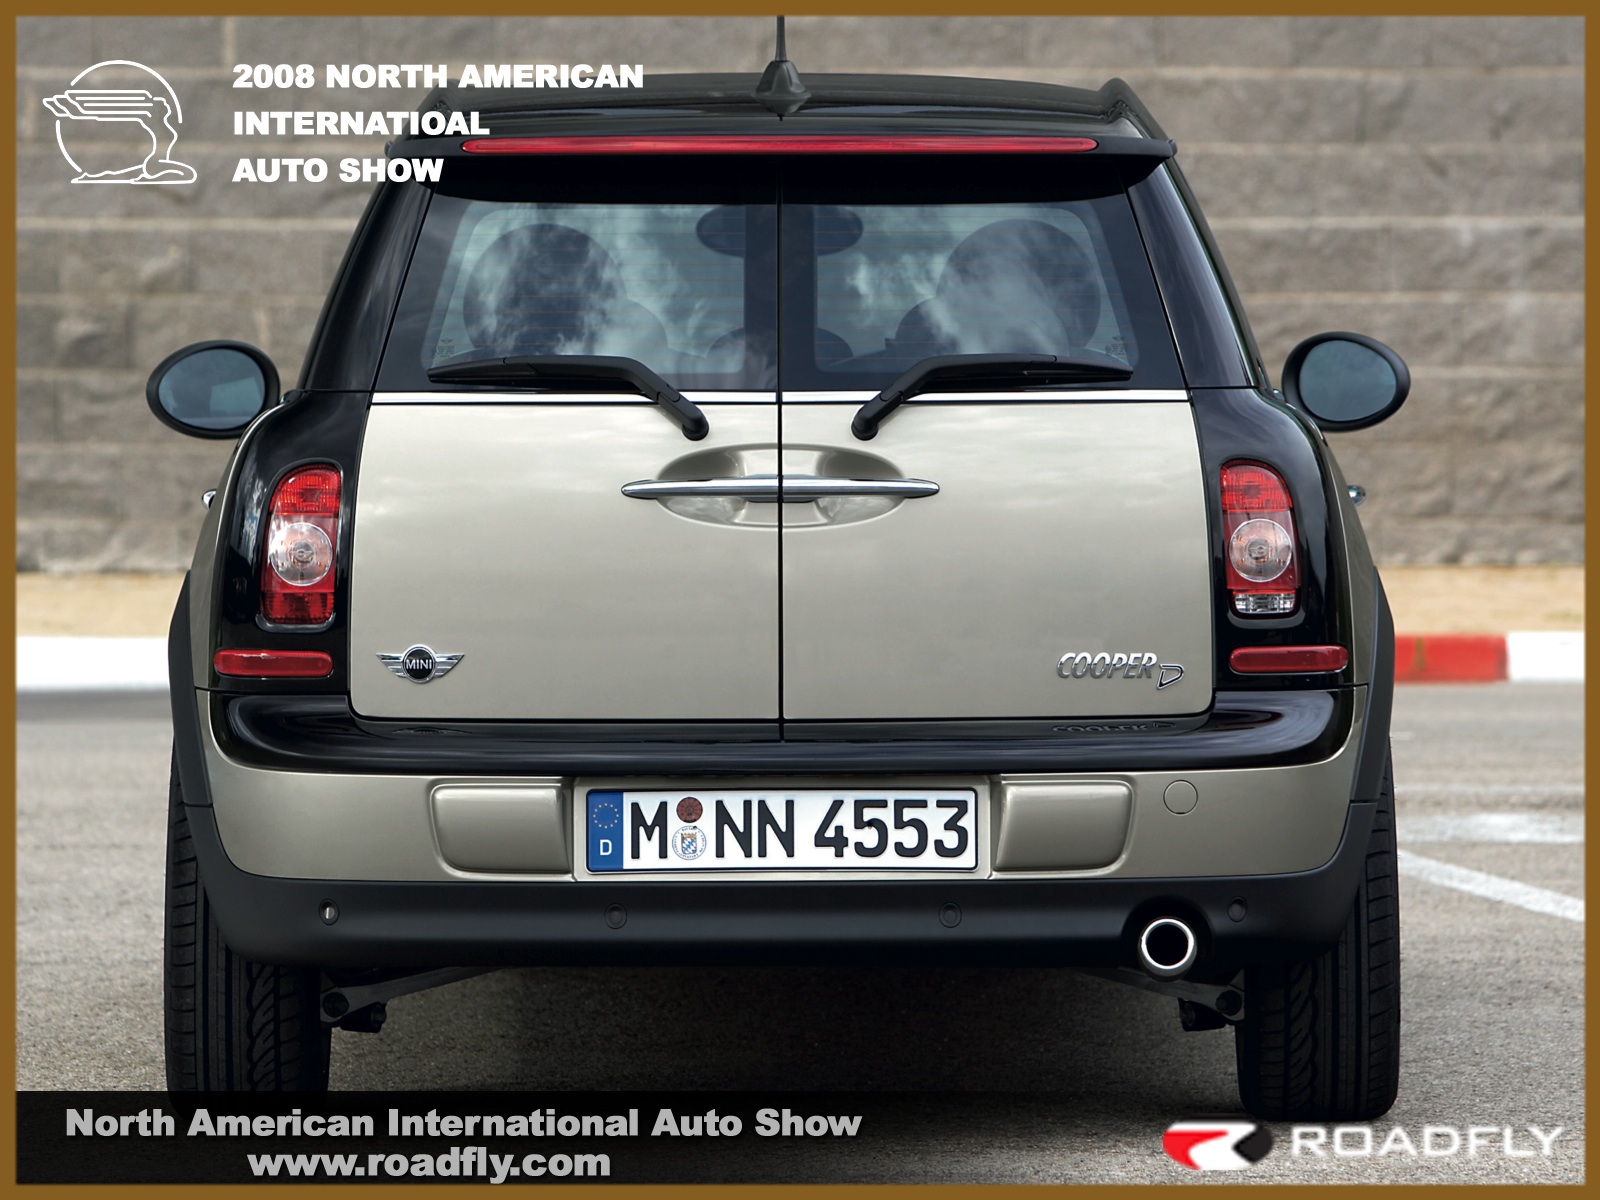 mini cooper clubman related images,151 to 200 - Zuoda Images